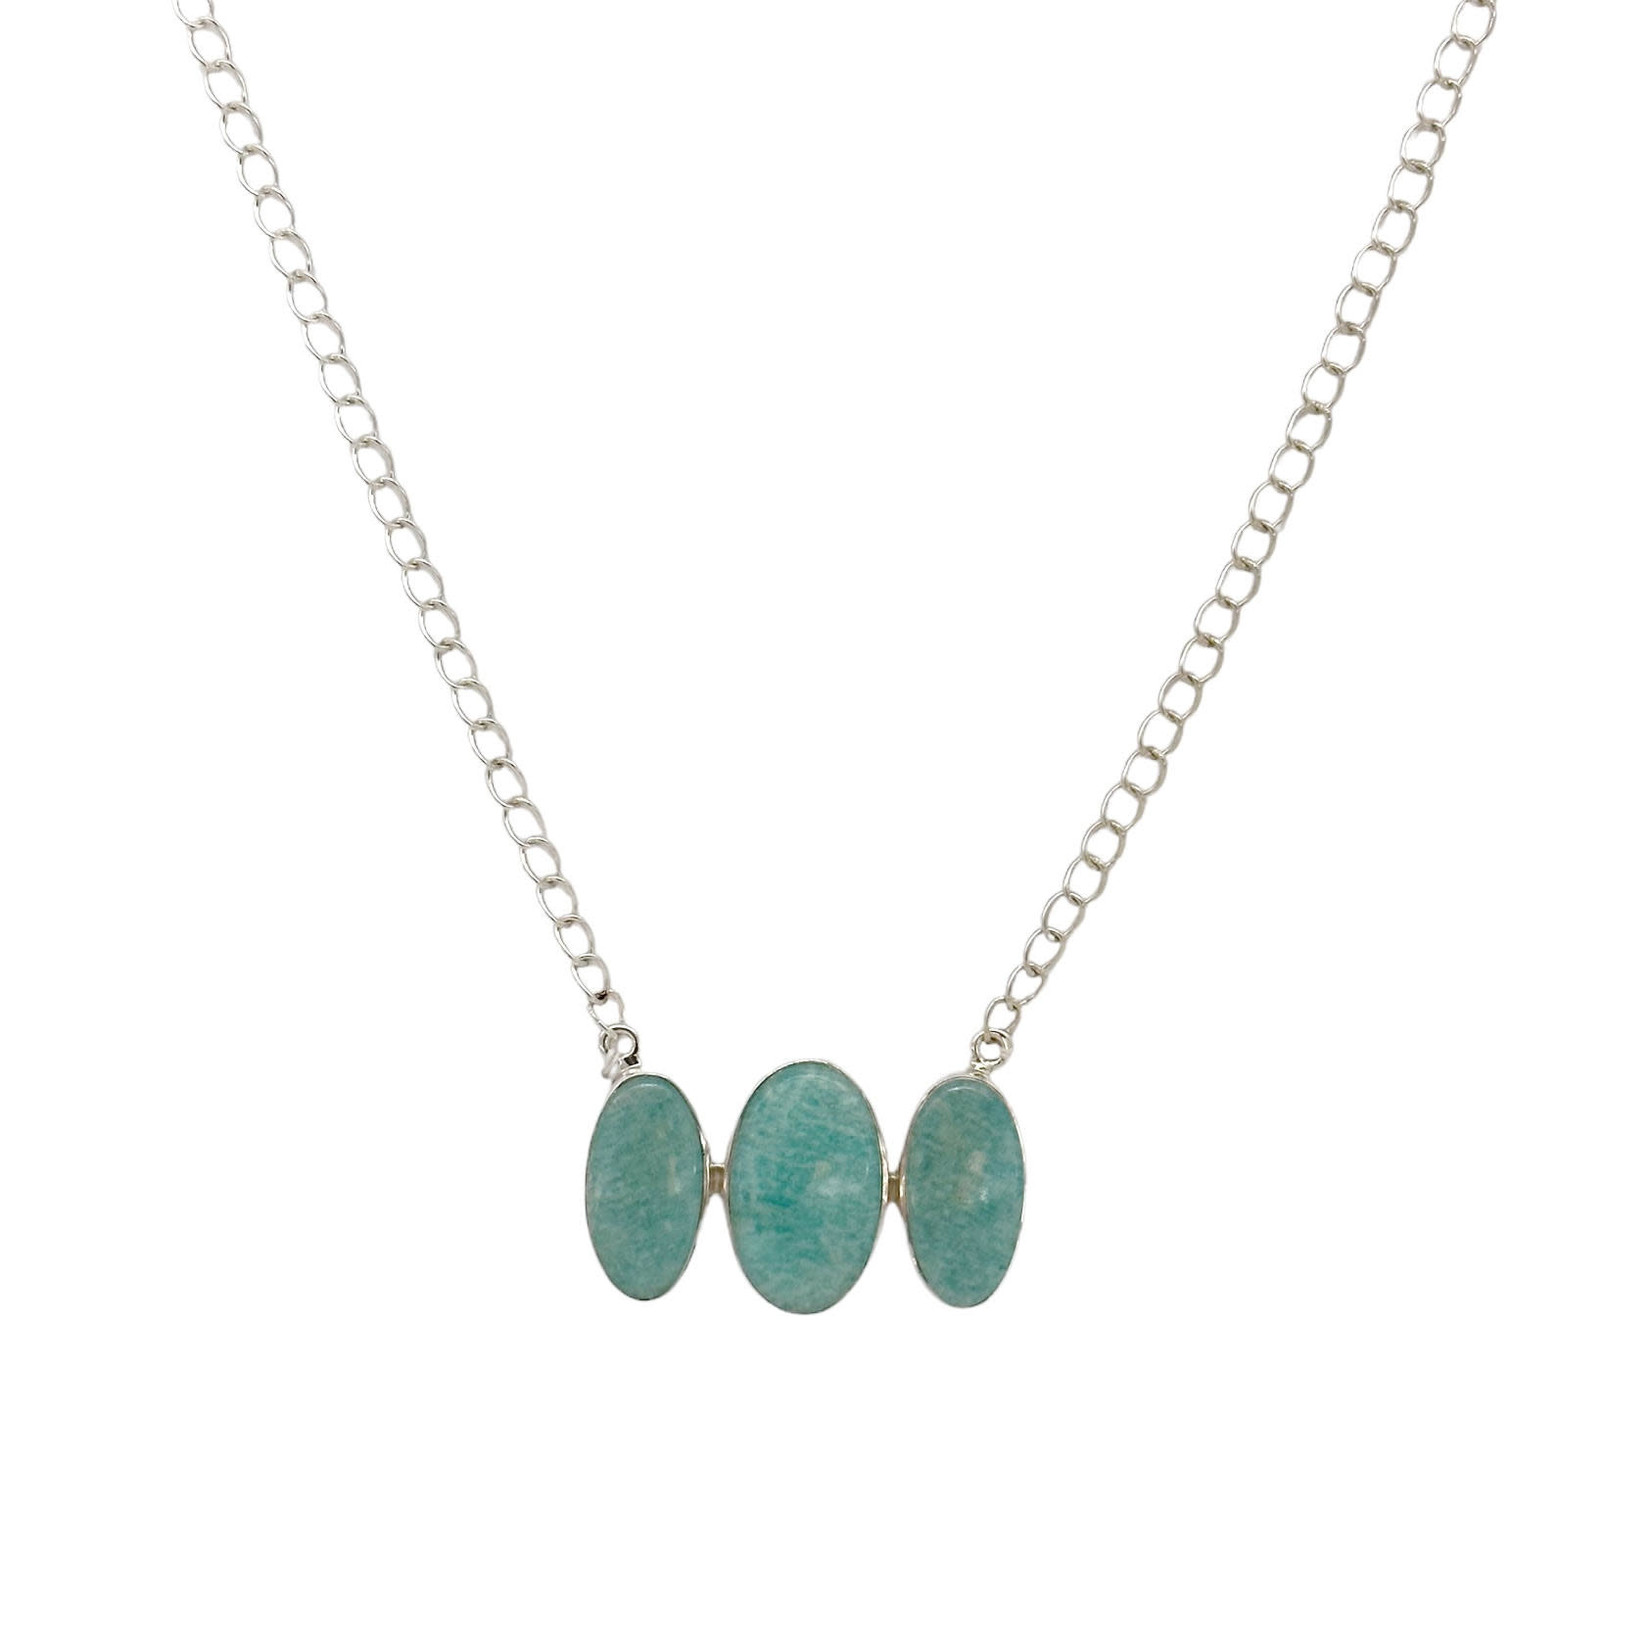 Sterling Silver Adjustable Necklace with 1, 19mm and 2, 17.5mm Oval Amazonite Gemstones